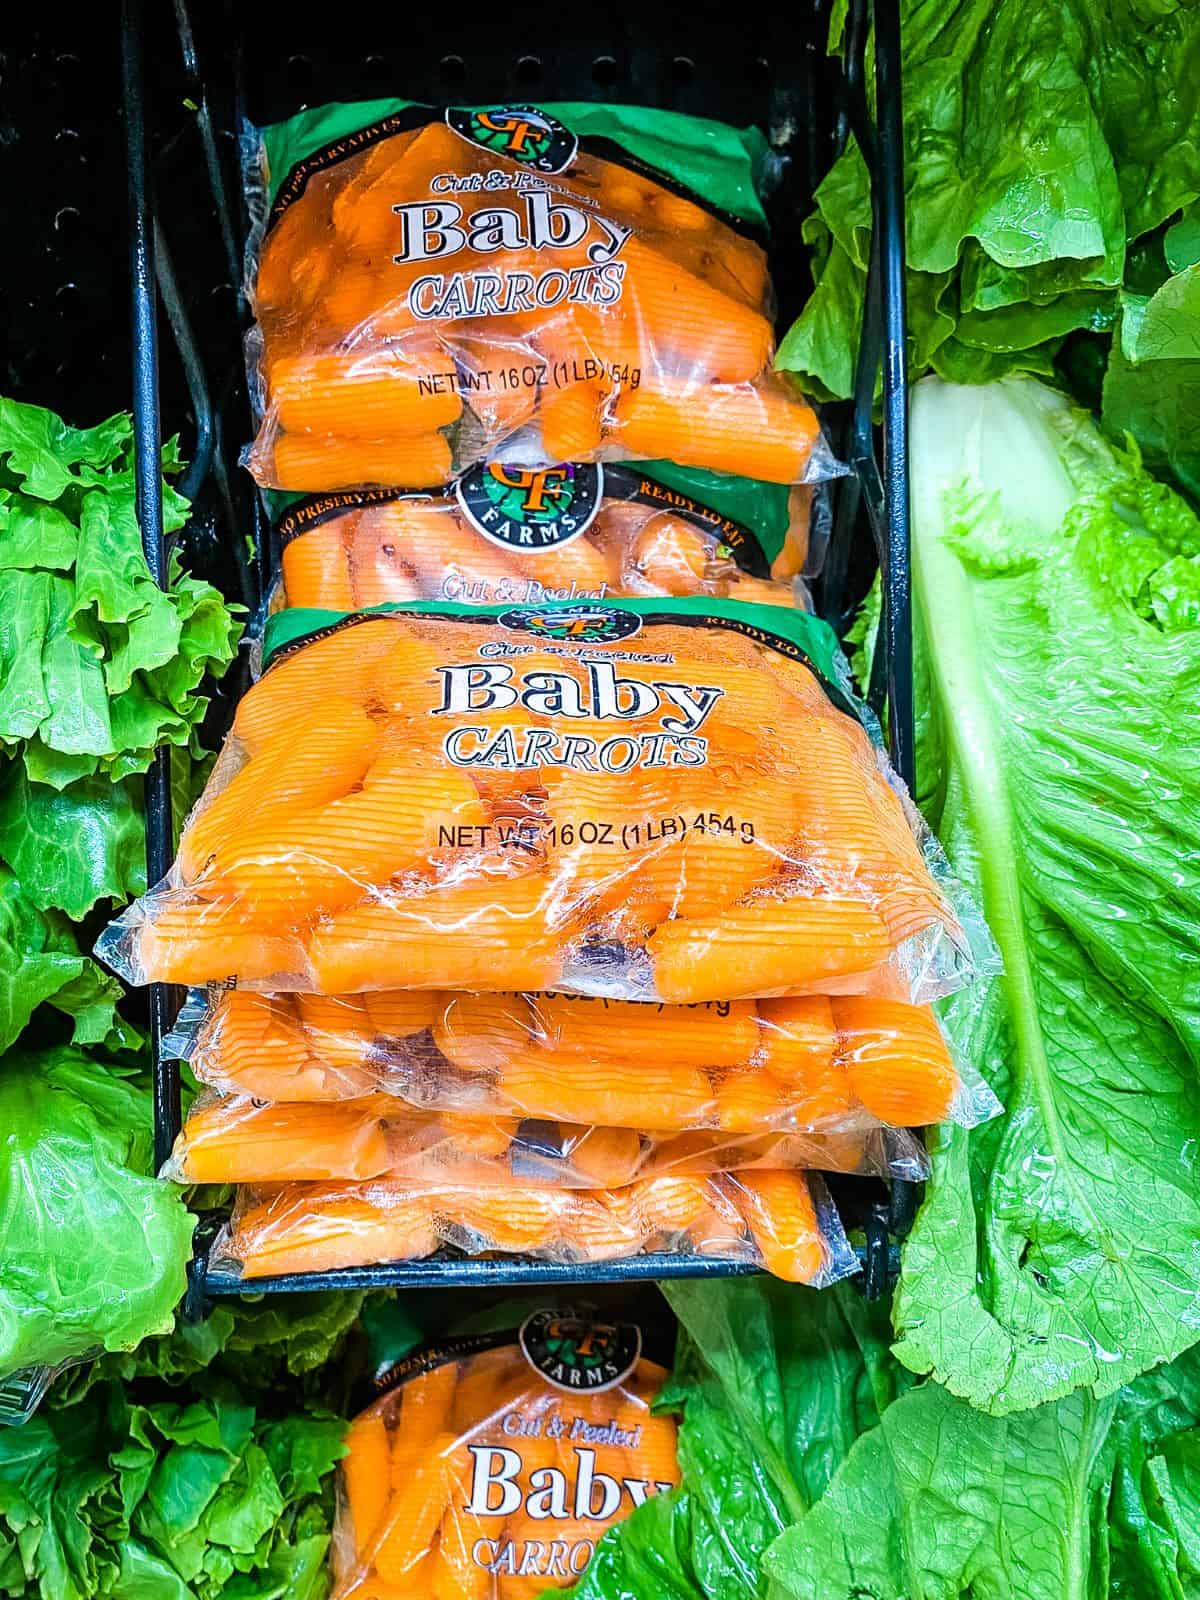 Bags of baby carrots on supermarket shelves.